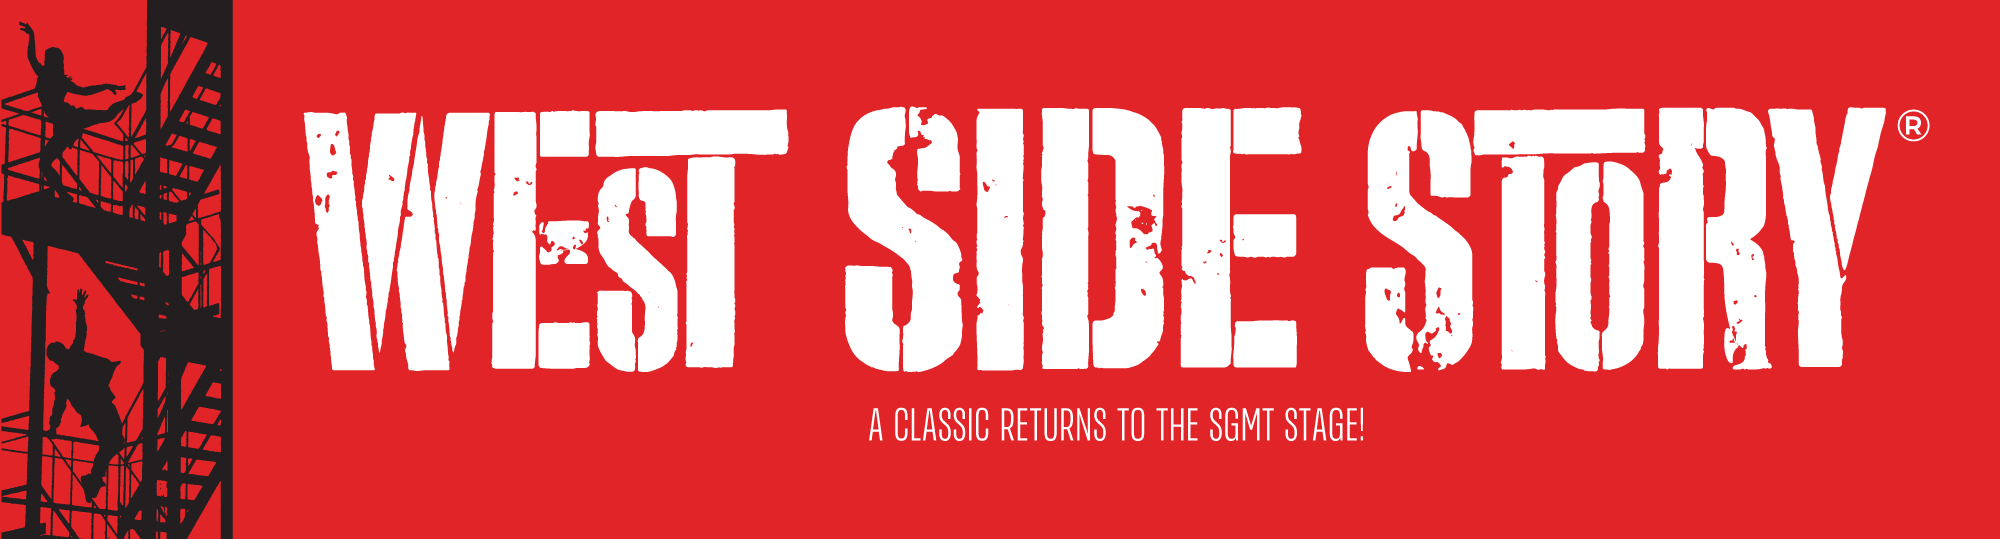 West Side Story banner